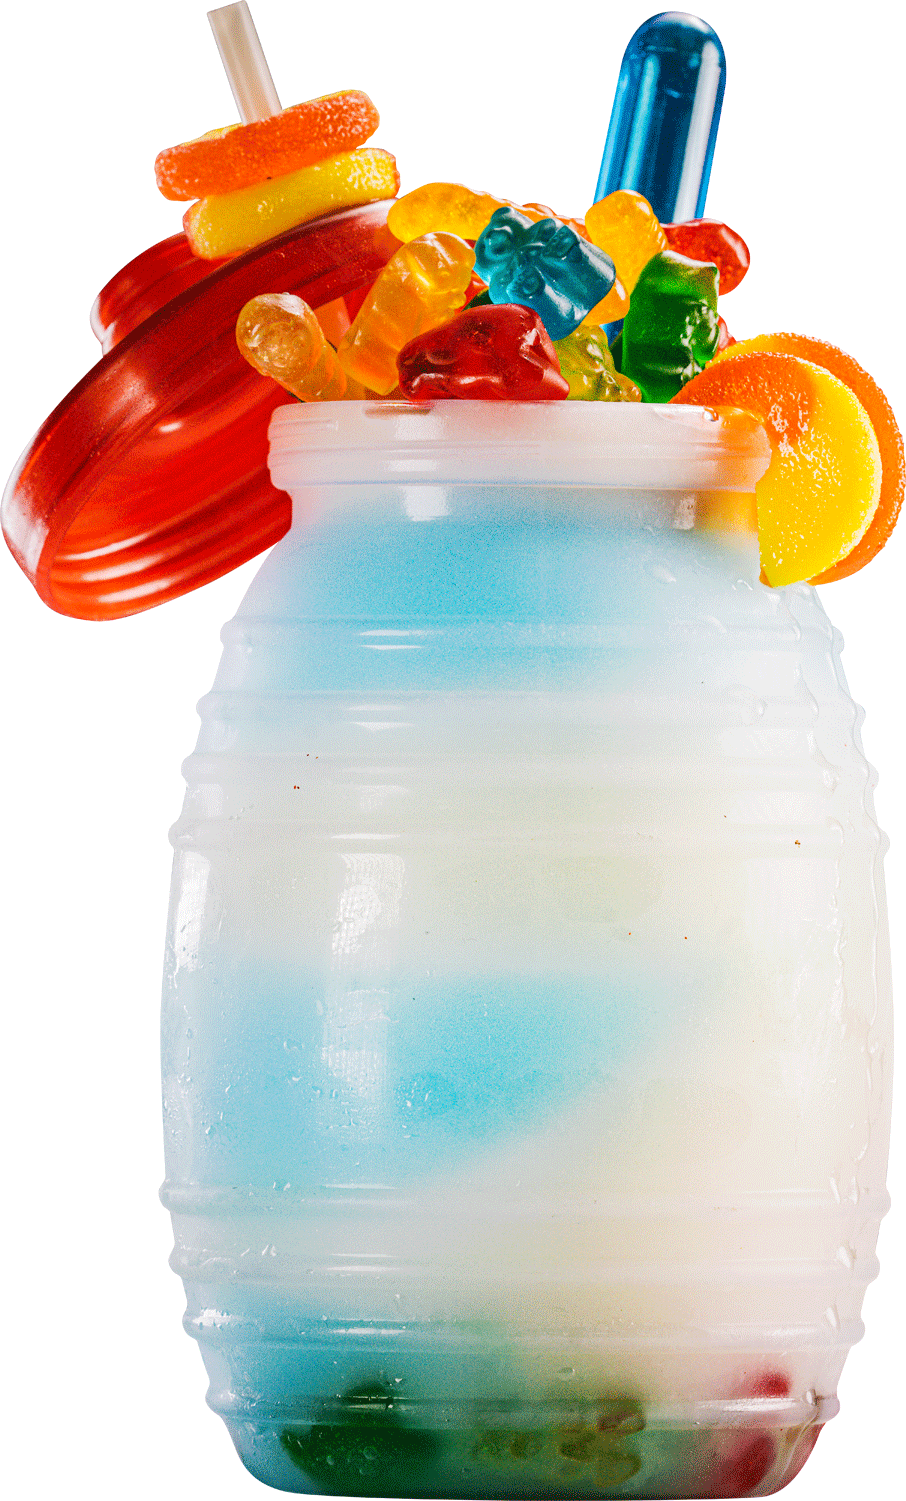 A jar filled with gummy bears and a straw.